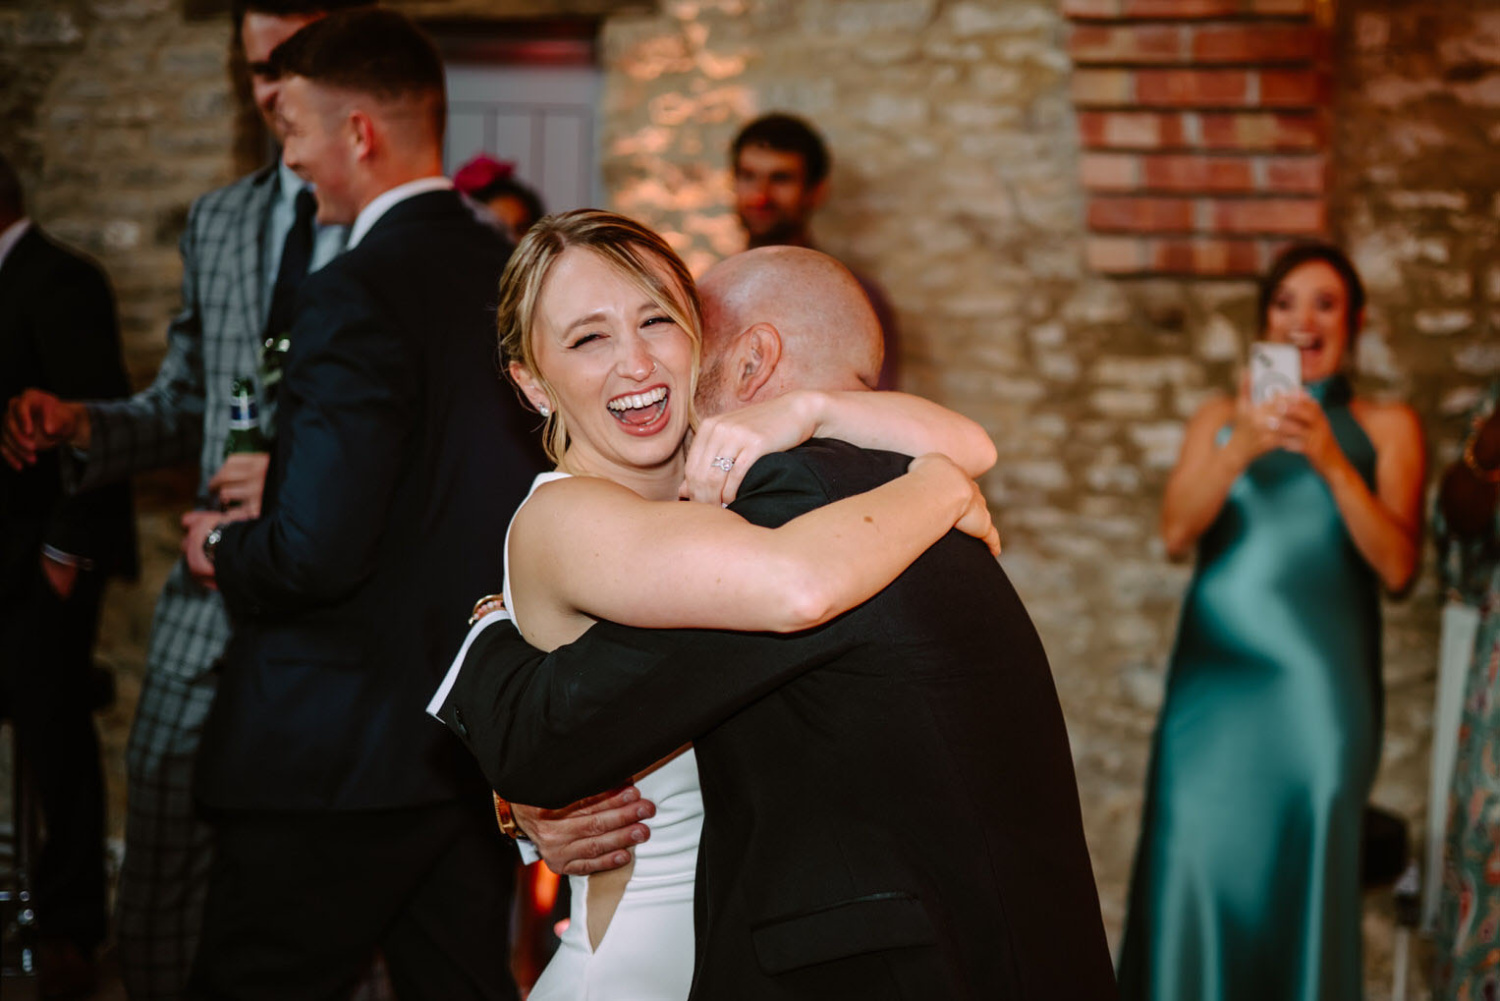 A bride and groom hugging at their wedding reception.